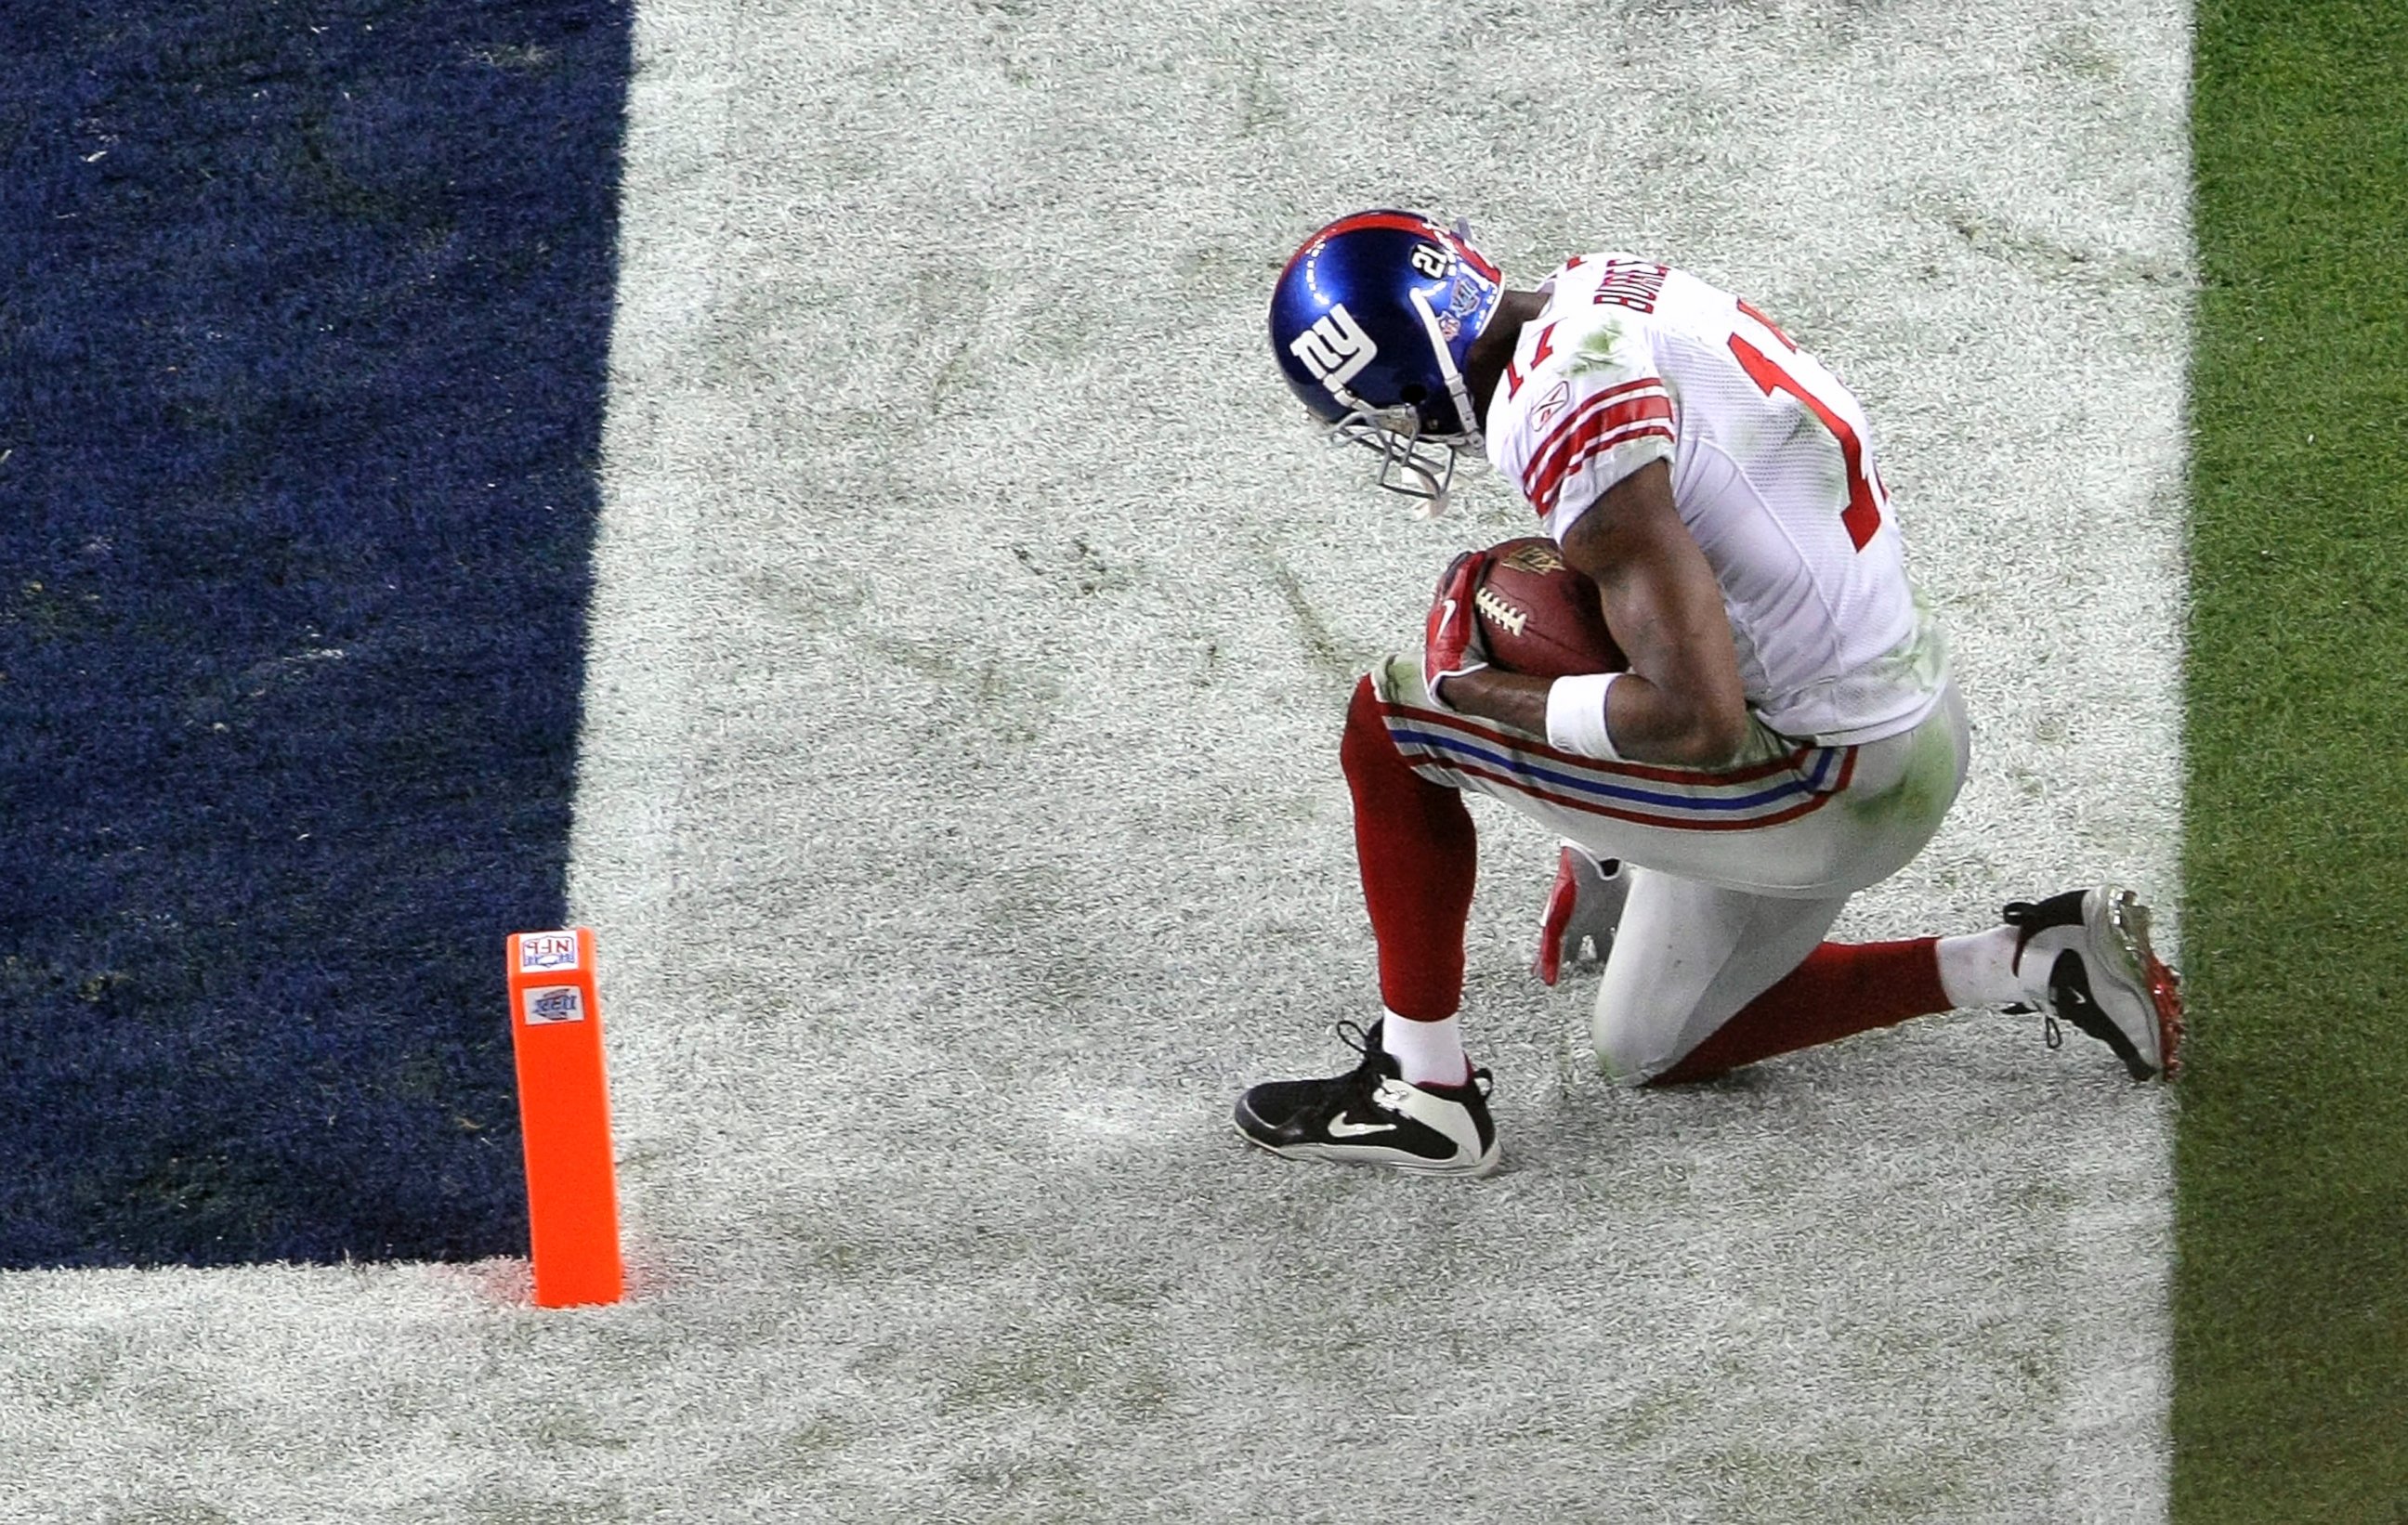 PHOTO: Plaxico Burress #17 of the New York Giants kneels just outside the end zone after he scored on a touchdown reception against the New England Patriots during Super Bowl XLII, Feb. 3, 2008, at the University of Phoenix Stadium in Glendale, Ariz.